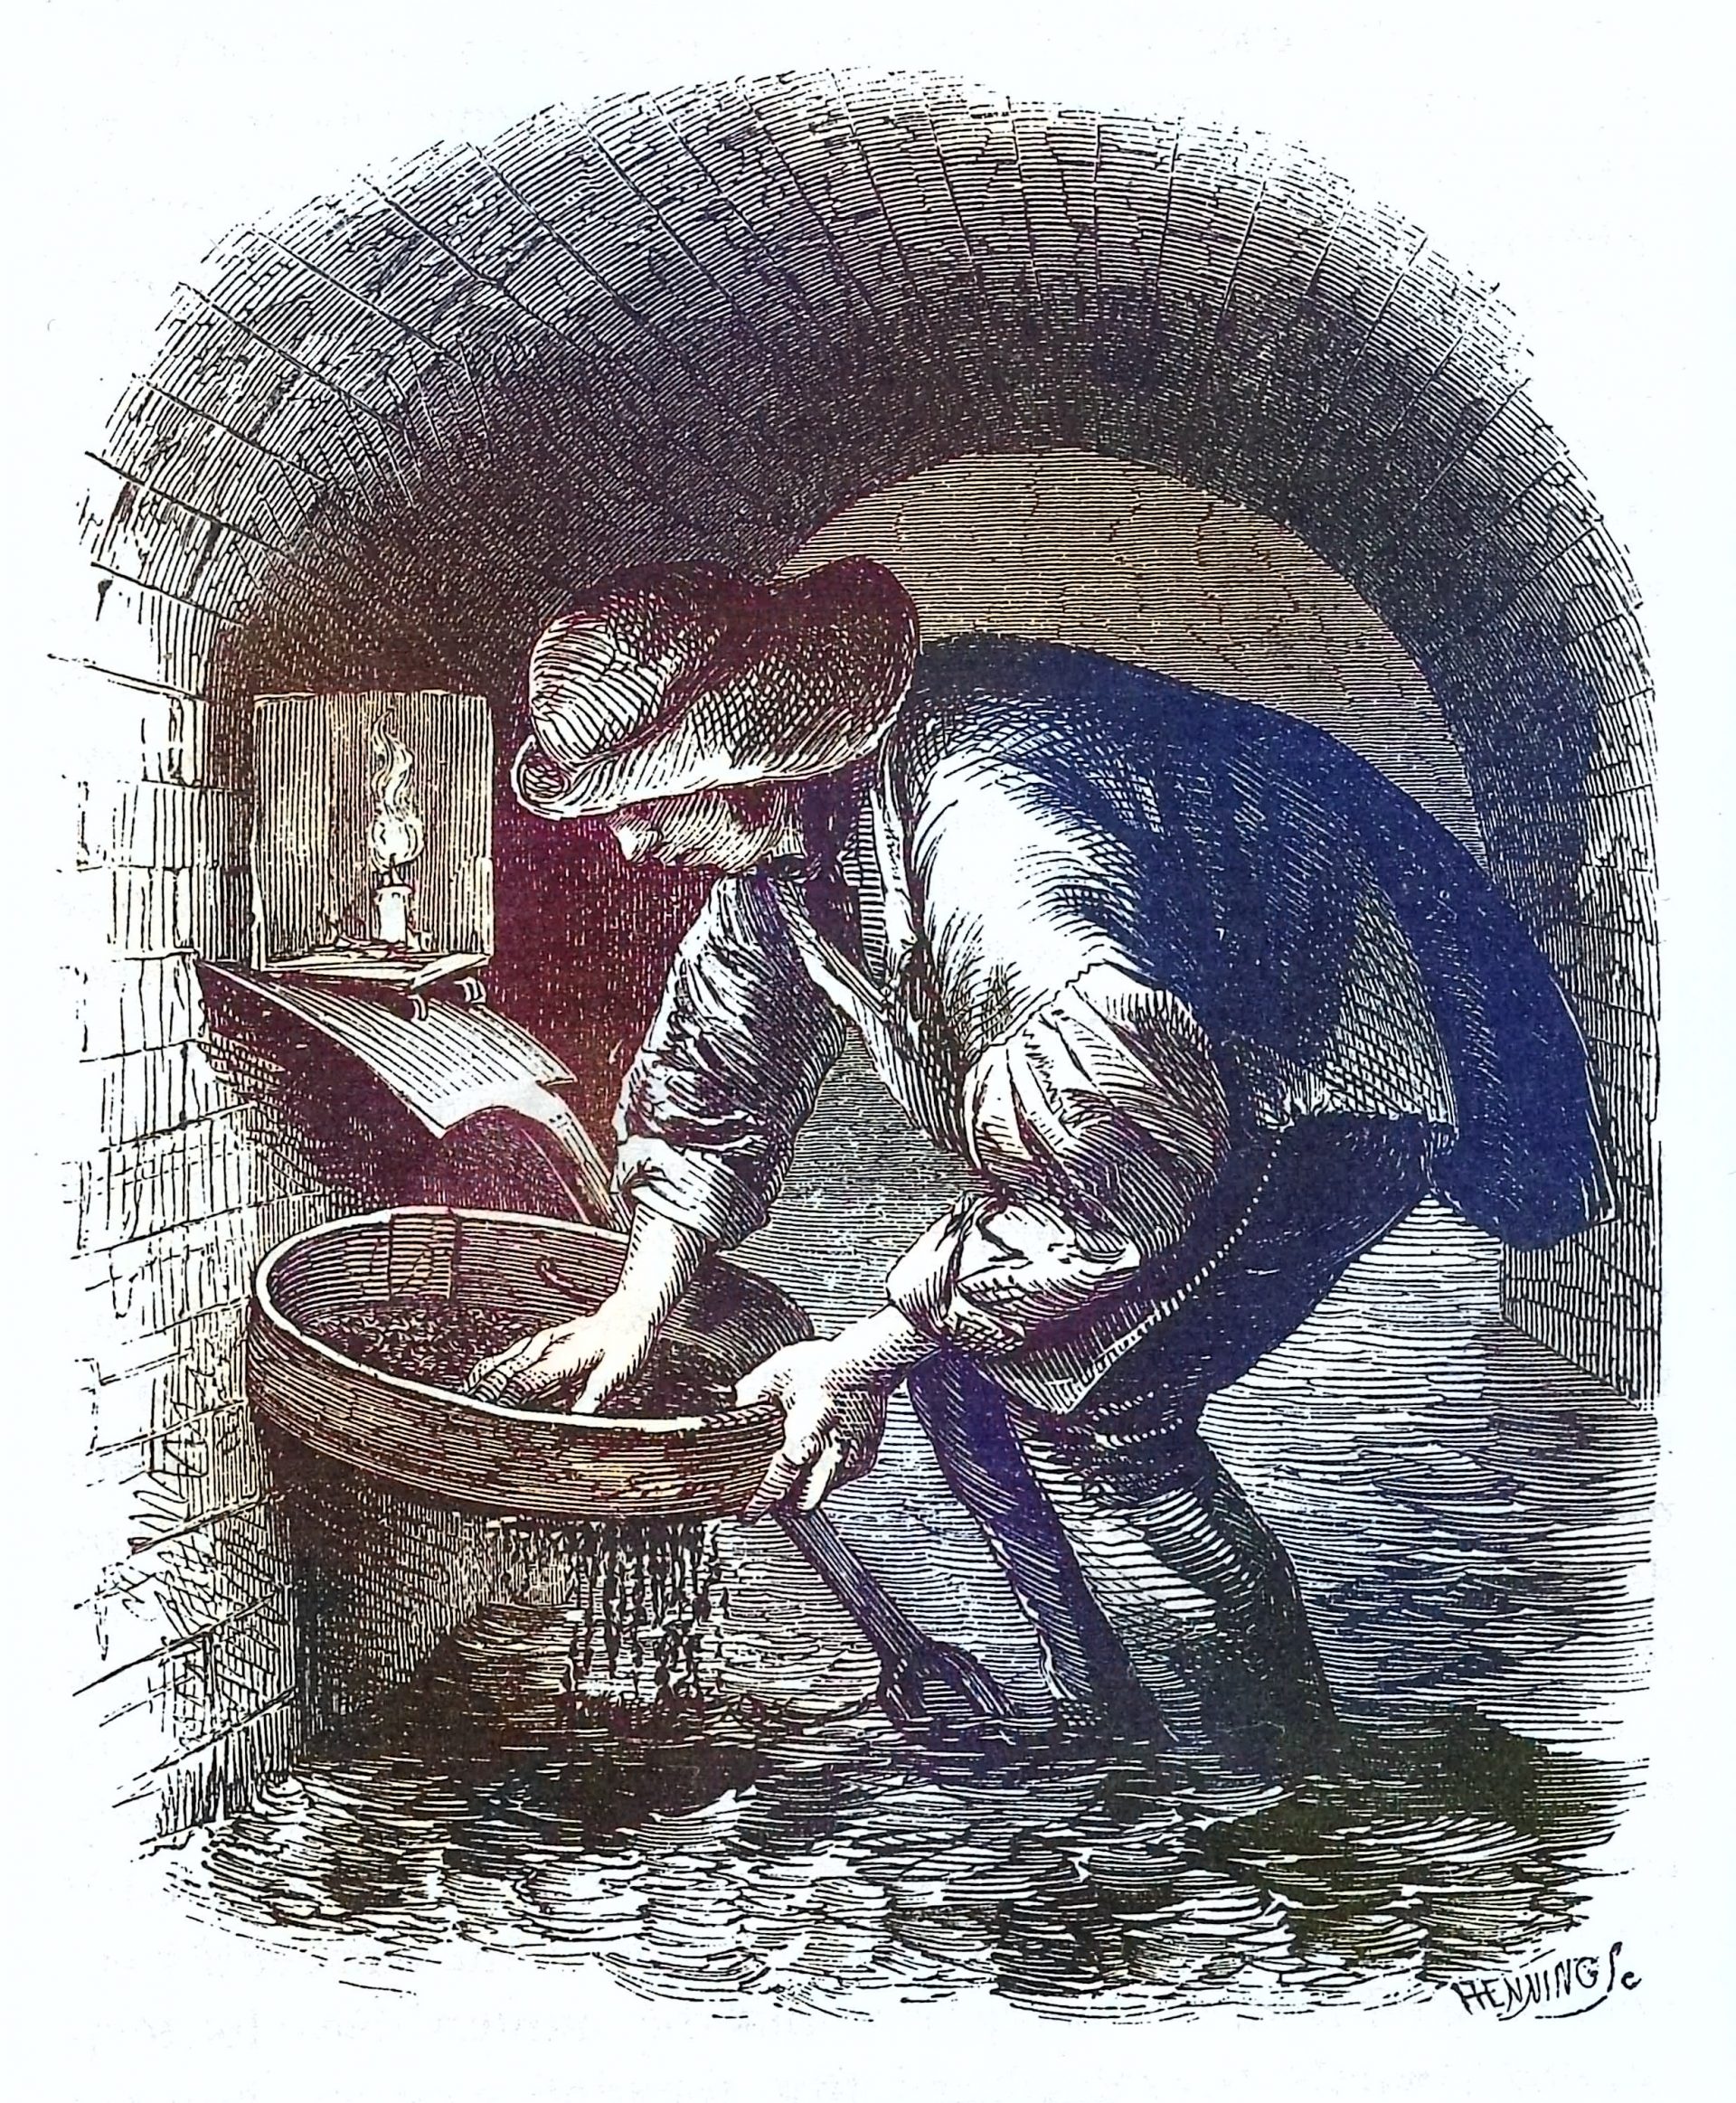 An engraving of a man in a hat and overalls, standing in a sewer tunnel. He is holding a sieve in one hand and searching through it with the other. The background is a dimly lit sewer tunnel.